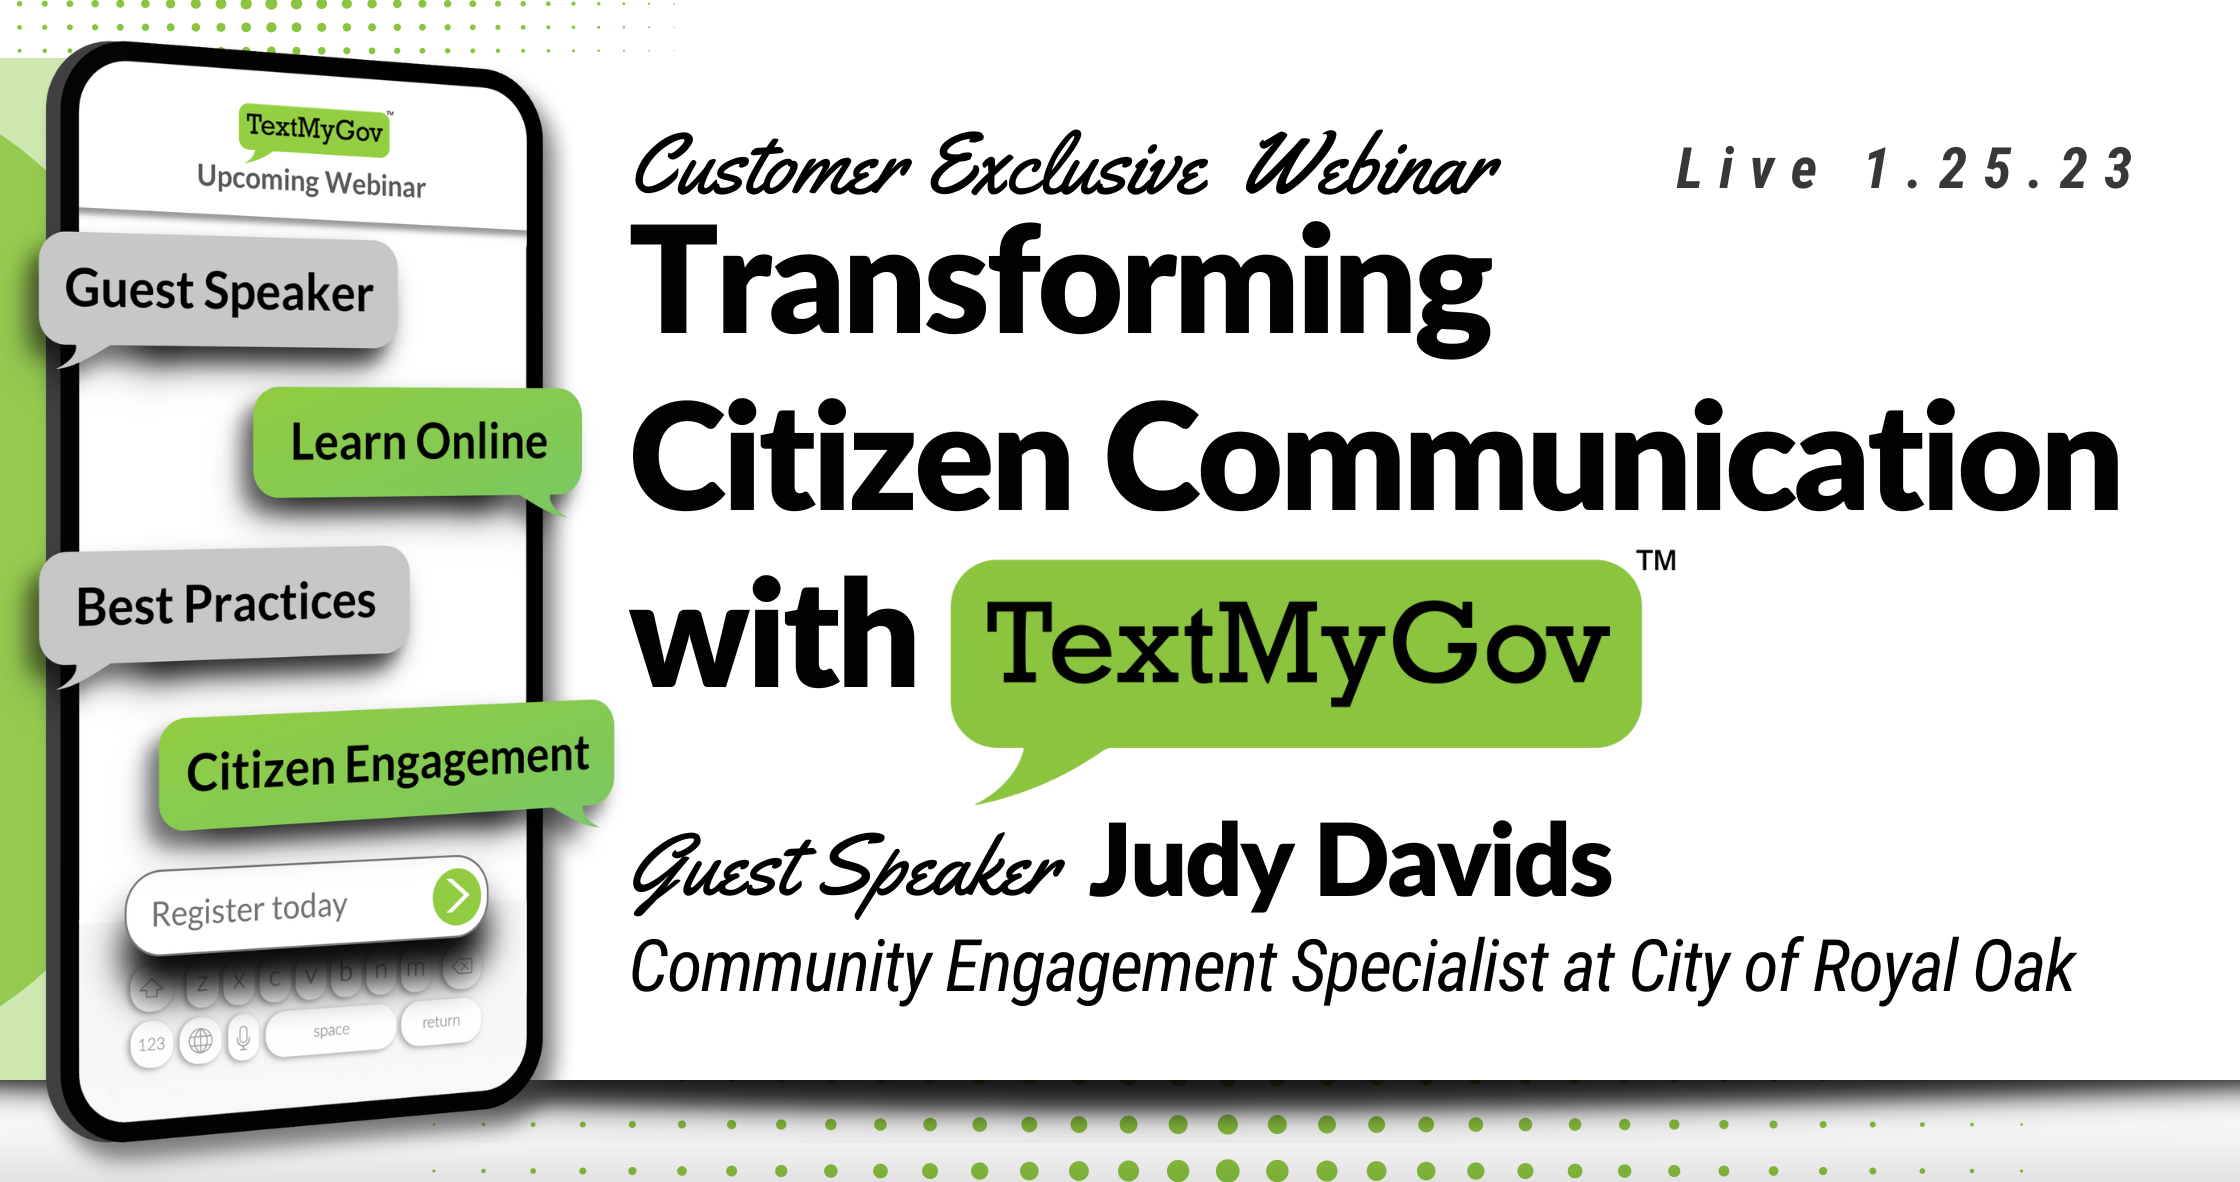 Featured image for “Transforming Citizen Communication with TextMyGov”